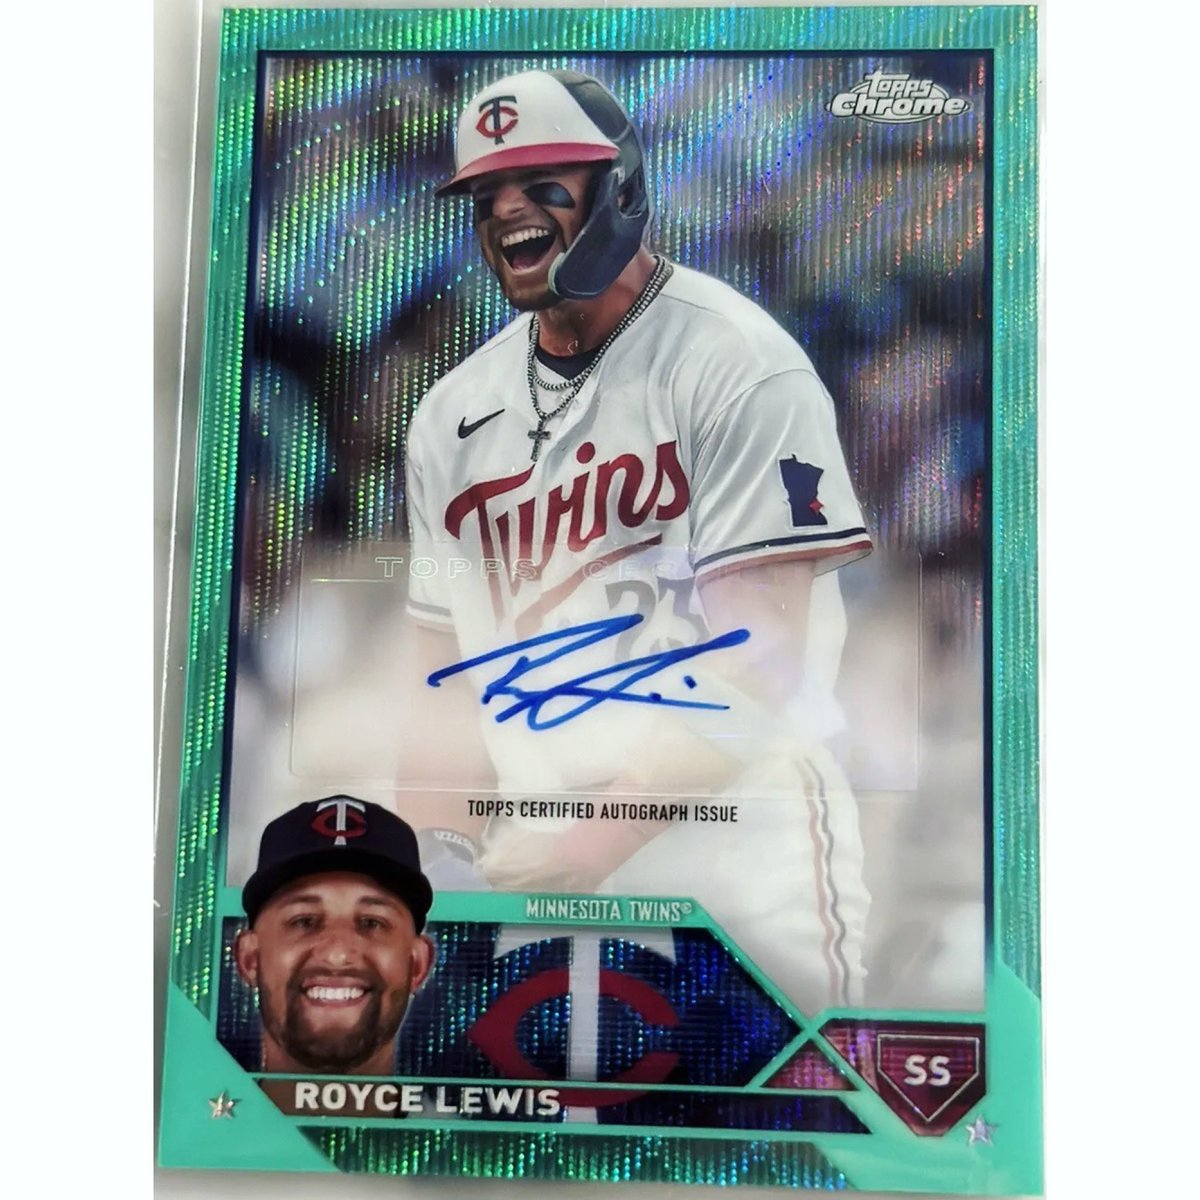 2023 Topps Chrome Update ROYCE LEWIS AUTO AQUA WAVE REFRACTOR /199 TWINS RC
 
#mntwins #wintwins #roycelewis #thehobby #sportscard #sportscardcollector